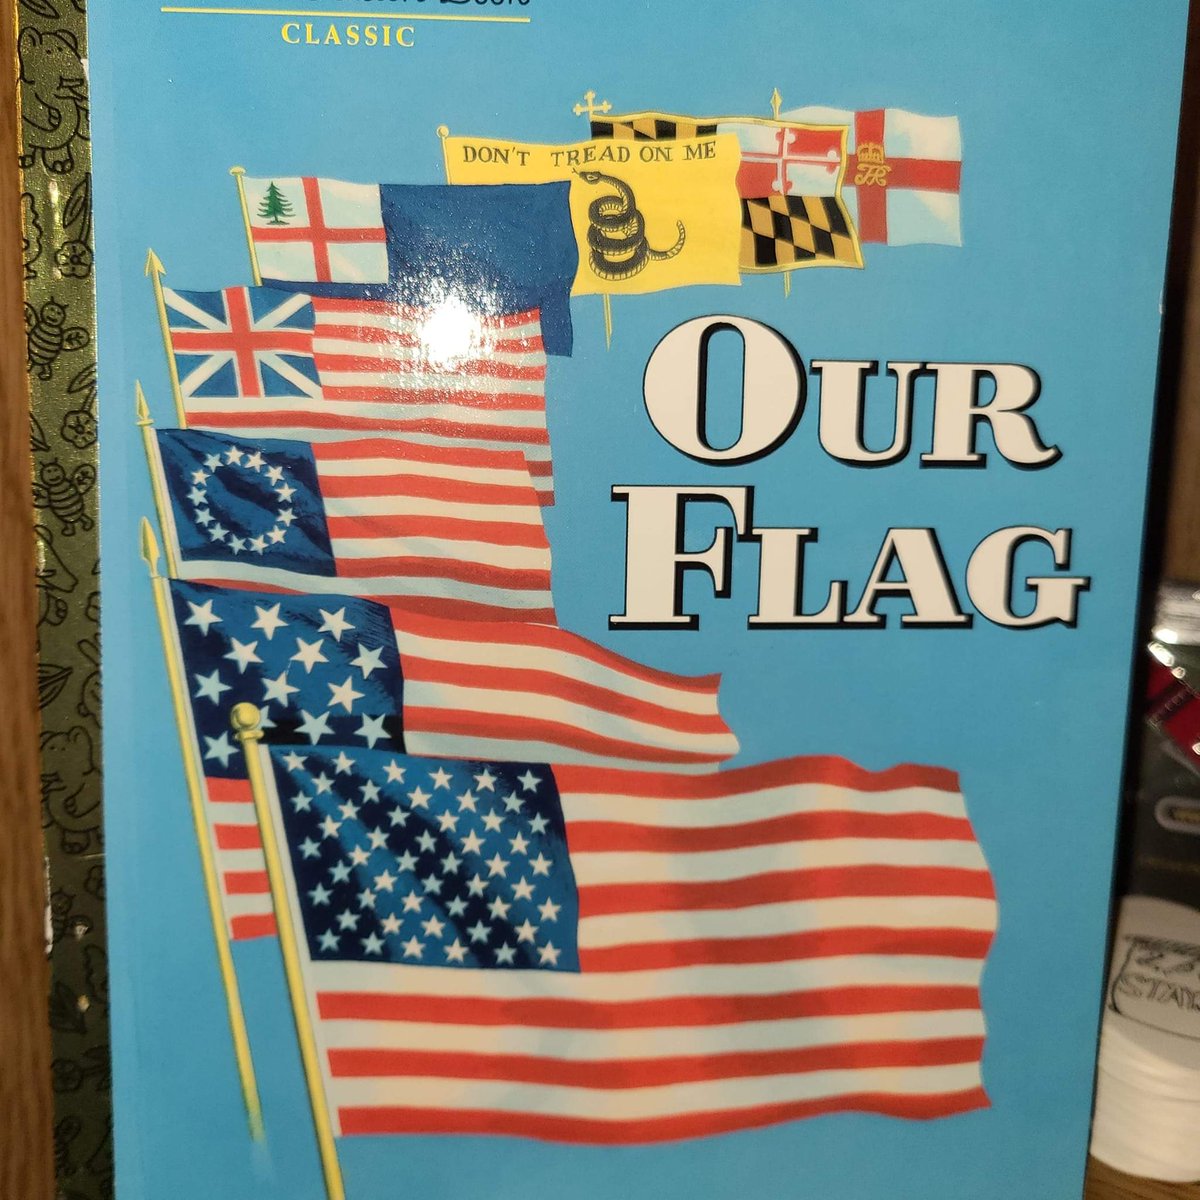 Golden book about Our Flag @ attackettadventures.shop/shop great for kids learning about our history.